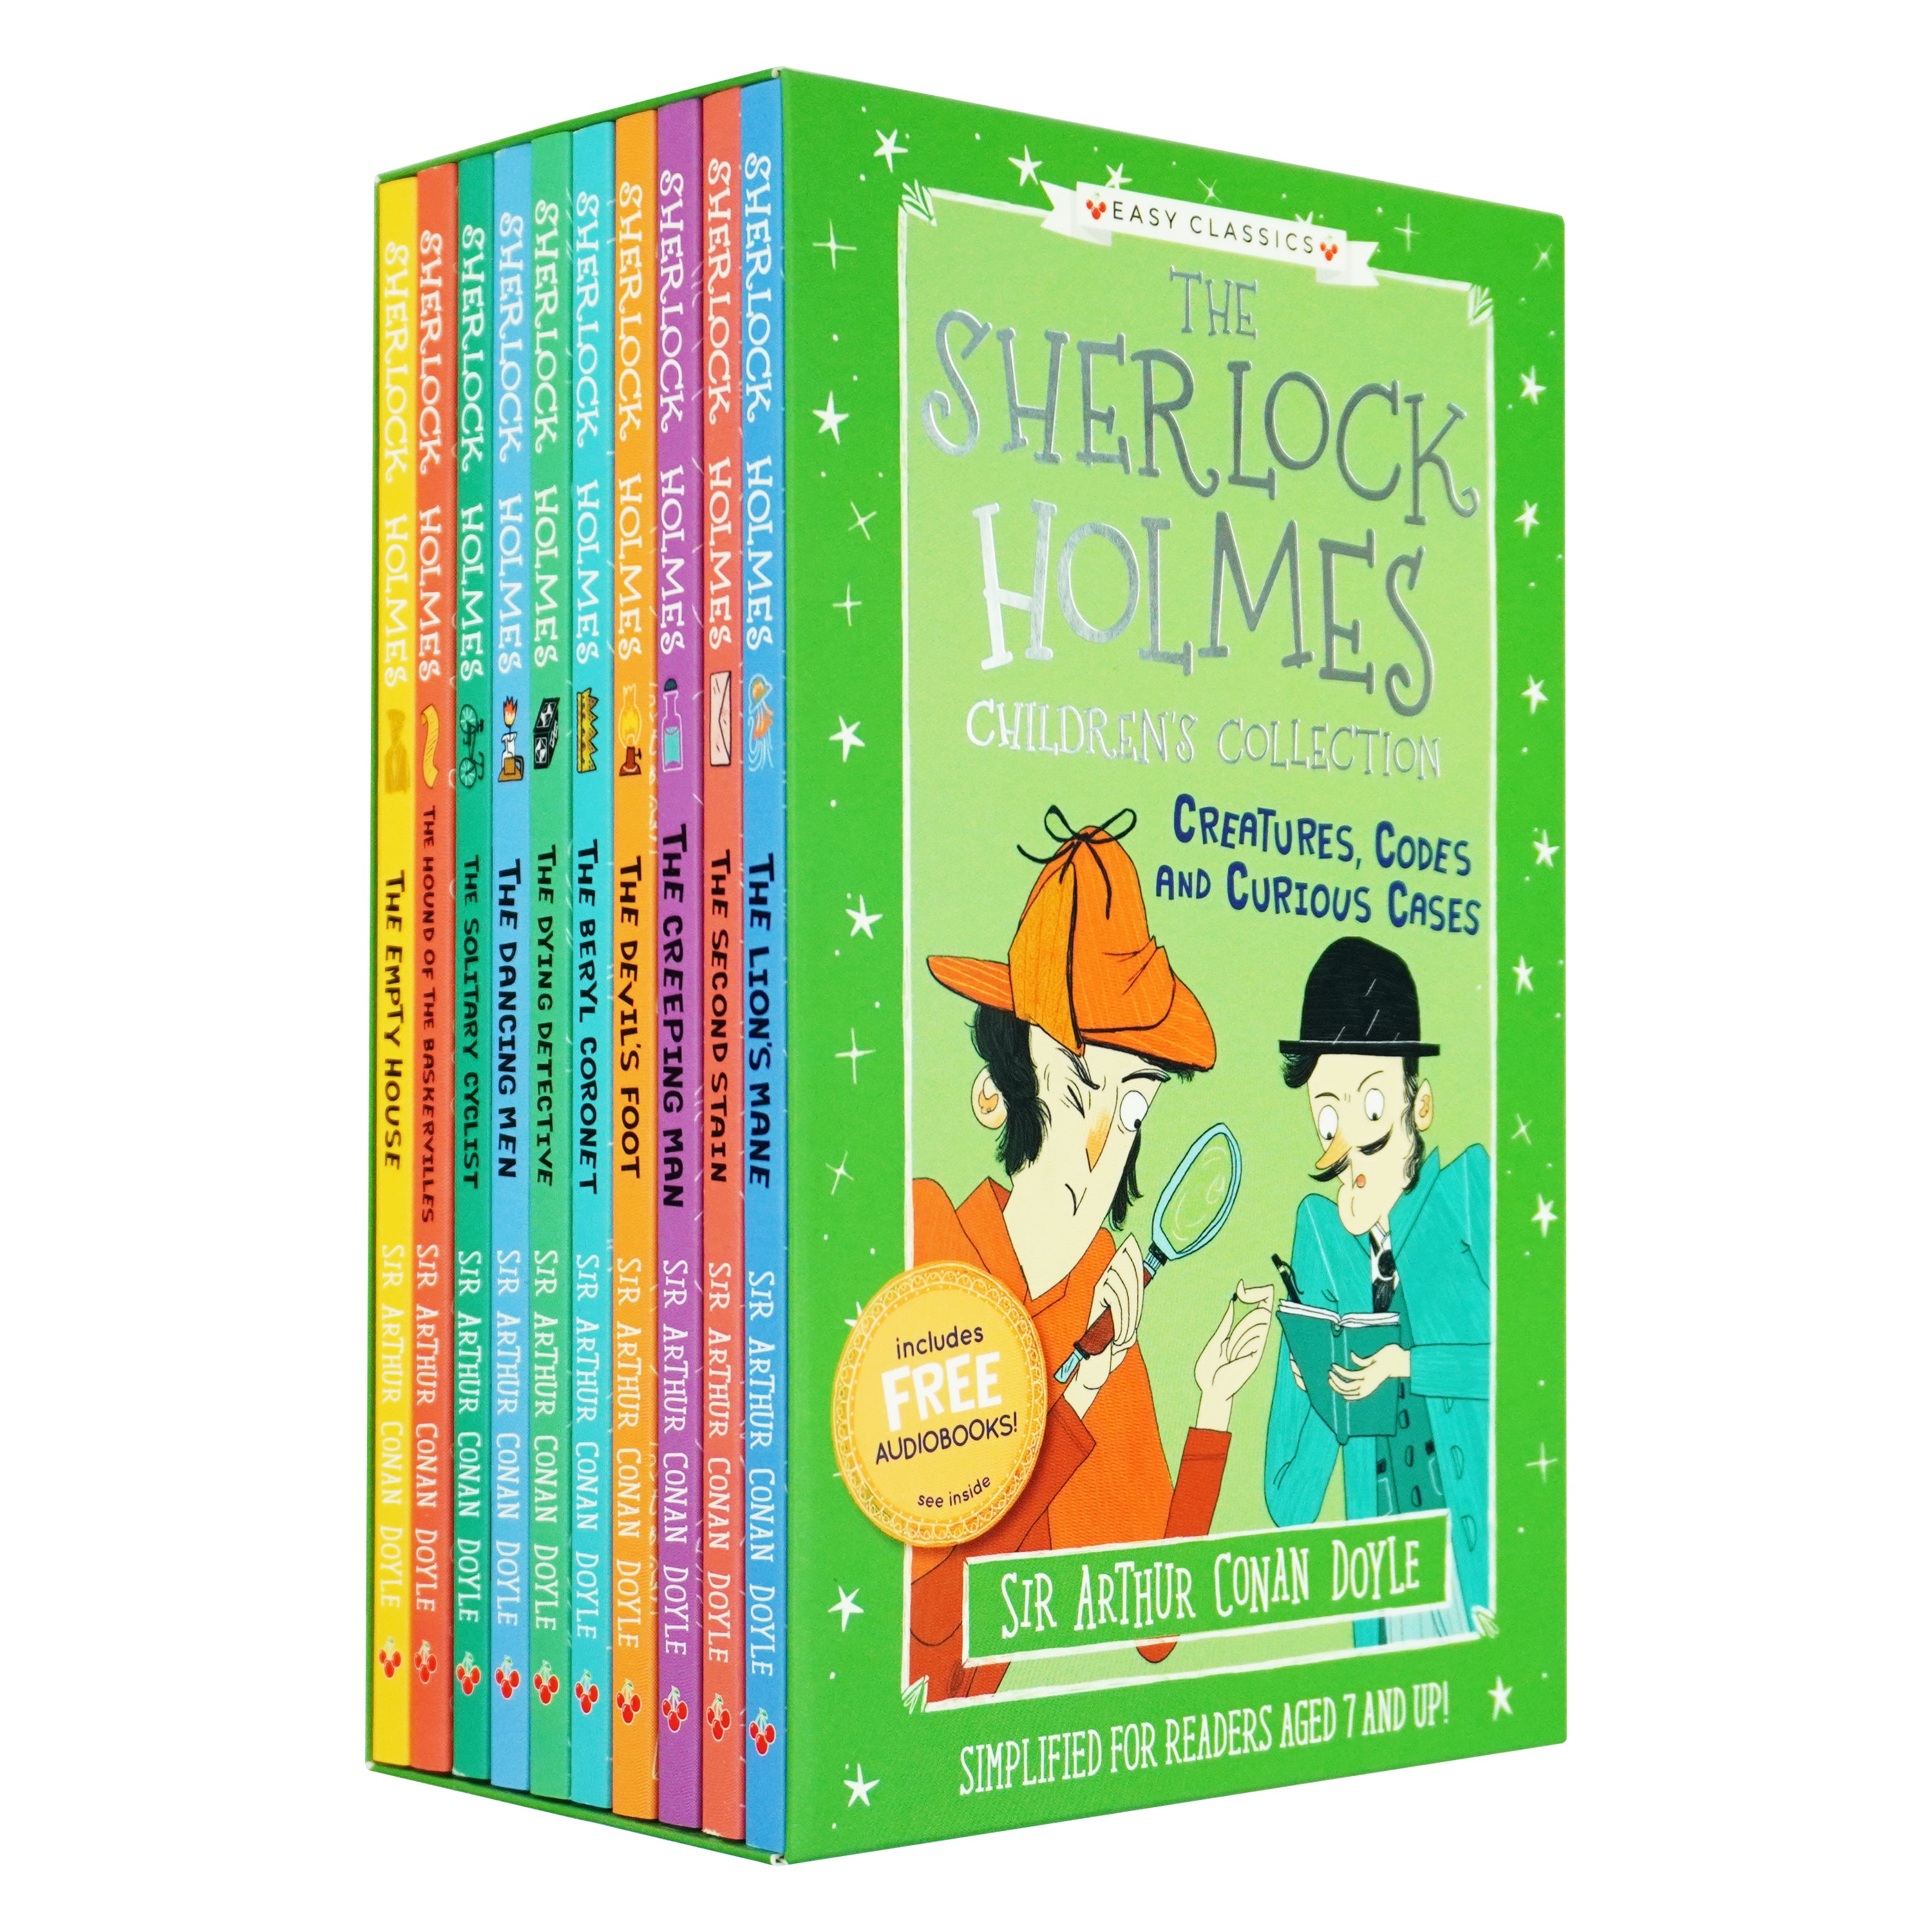 Bangzo　The　Curiou　Creatures,　Sherlock　and　Wholesale　Holmes　Books　Children's　Collection:　Codes　–